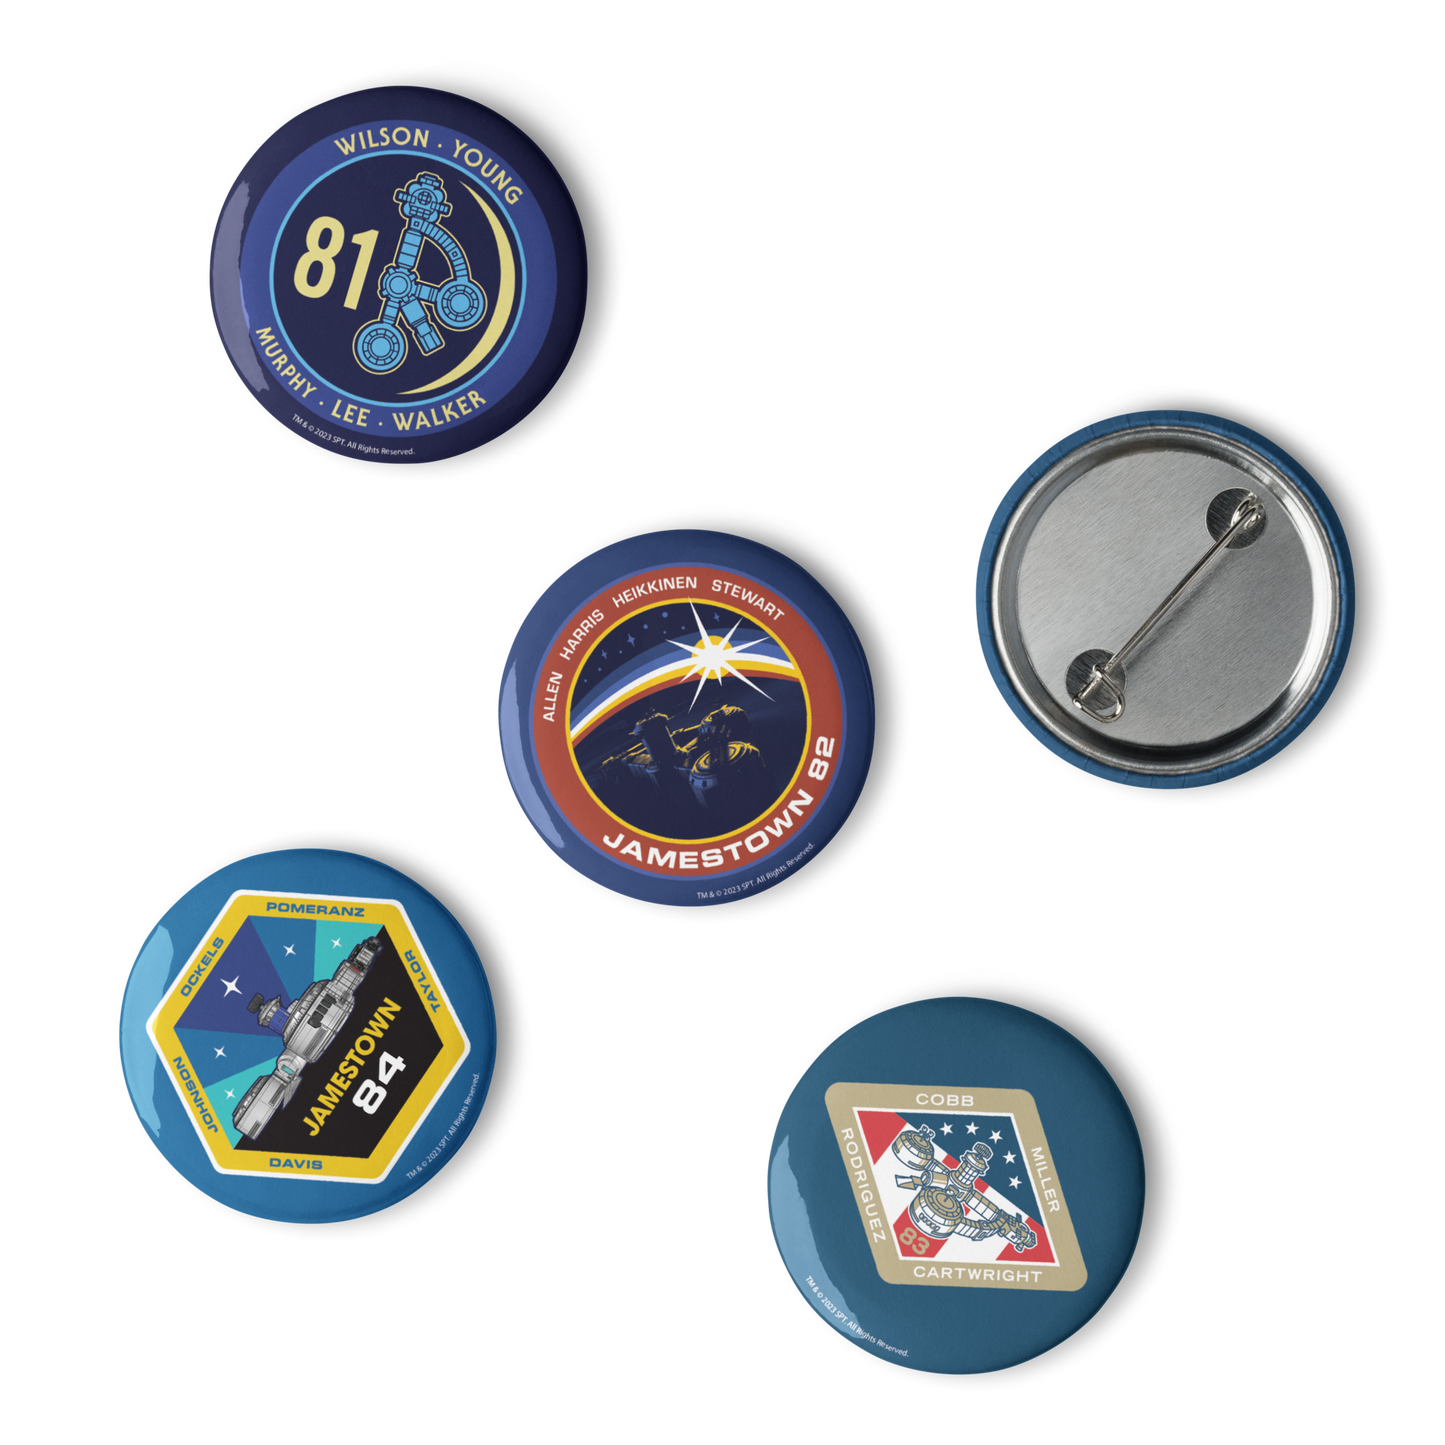 For All Mankind Pin Buttons Set 4 - Icon Heroes 